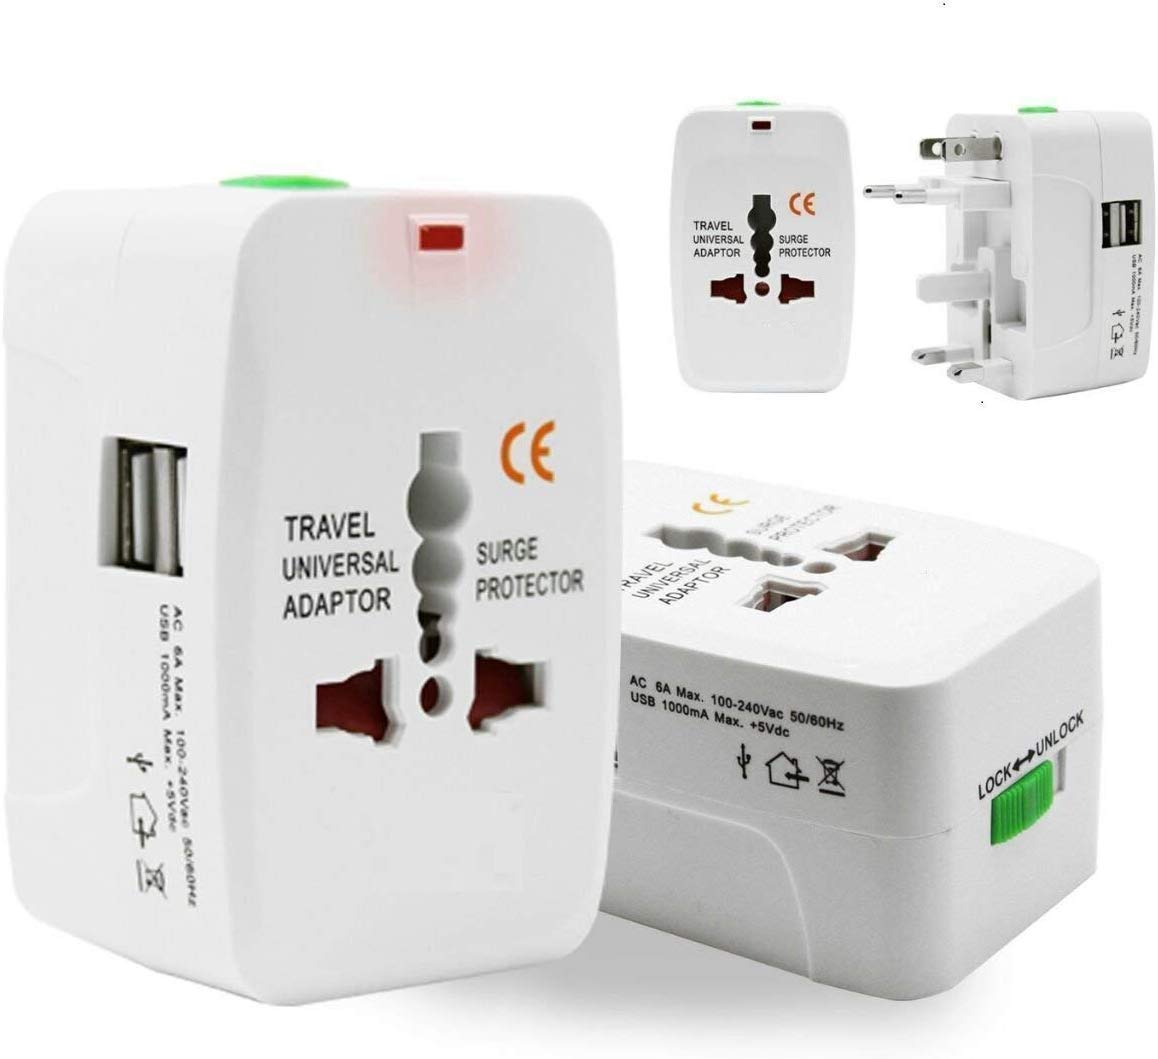 Top-Rated Universal Travel Charger Adapter Plug for International Use